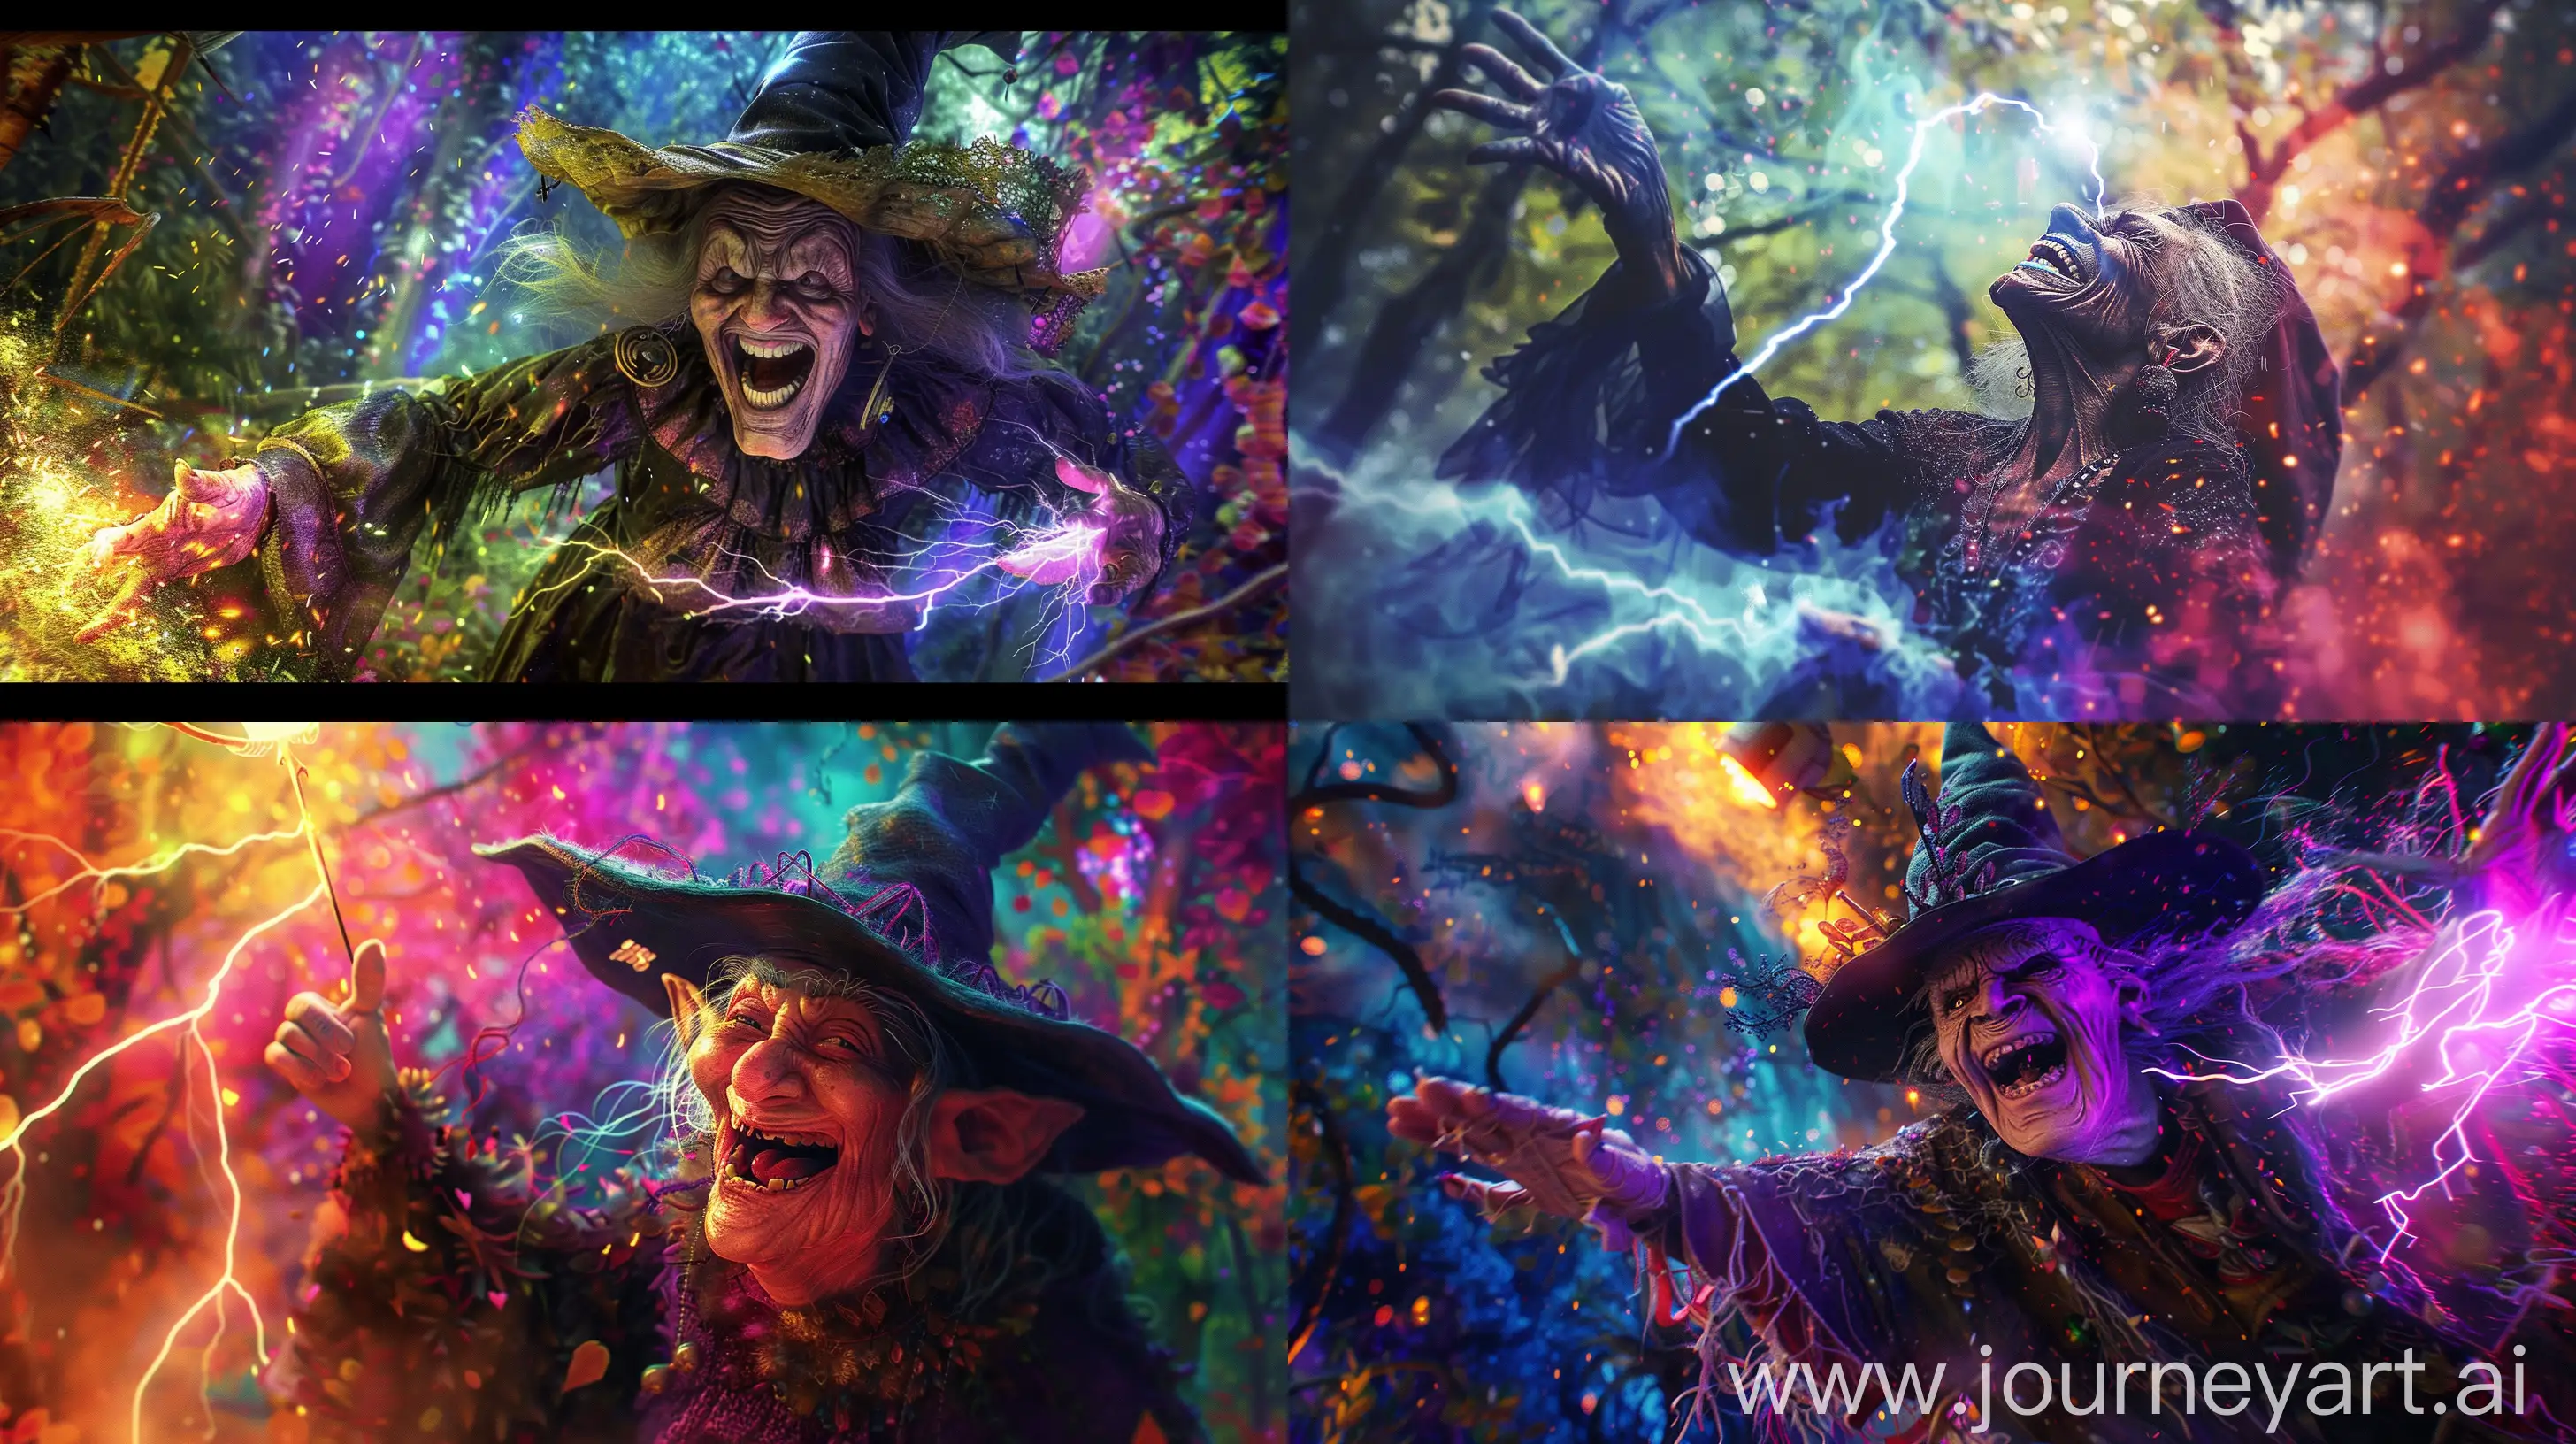 Creepy-Laughing-Witch-Casting-Electric-Magic-Spell-in-Colorful-Forest